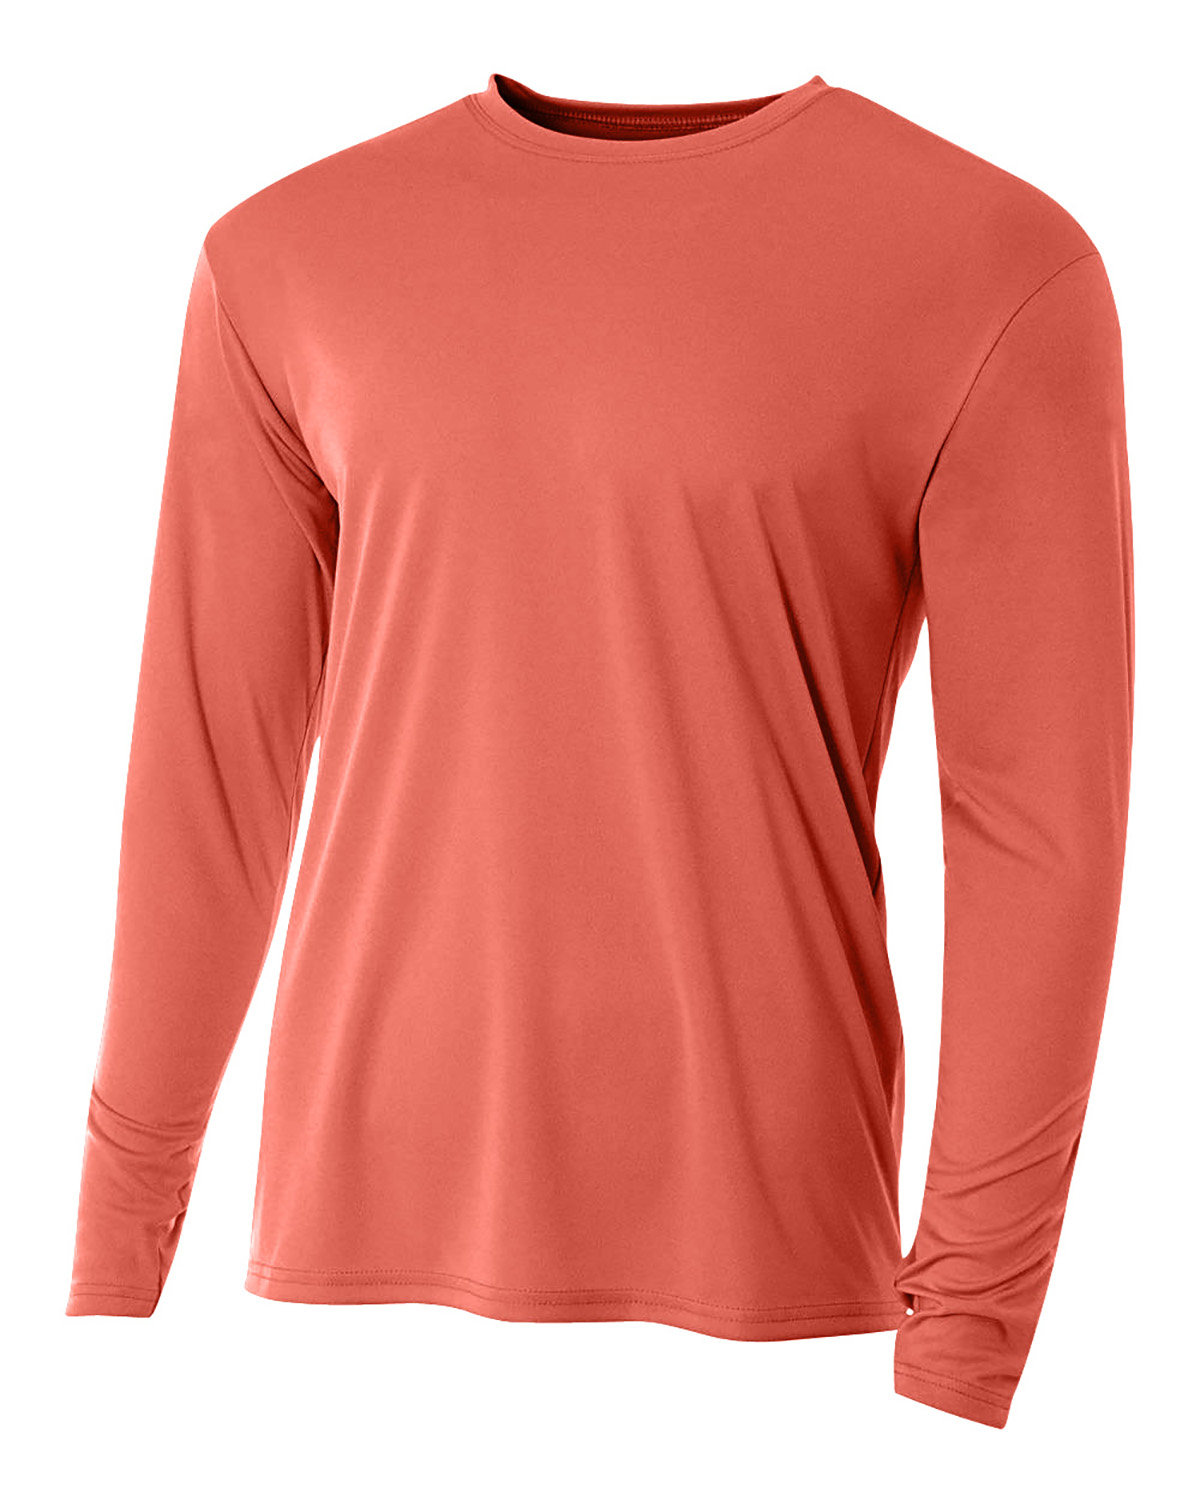 A4 Youth Long Sleeve Cooling Performance Crew Shirt CORAL 